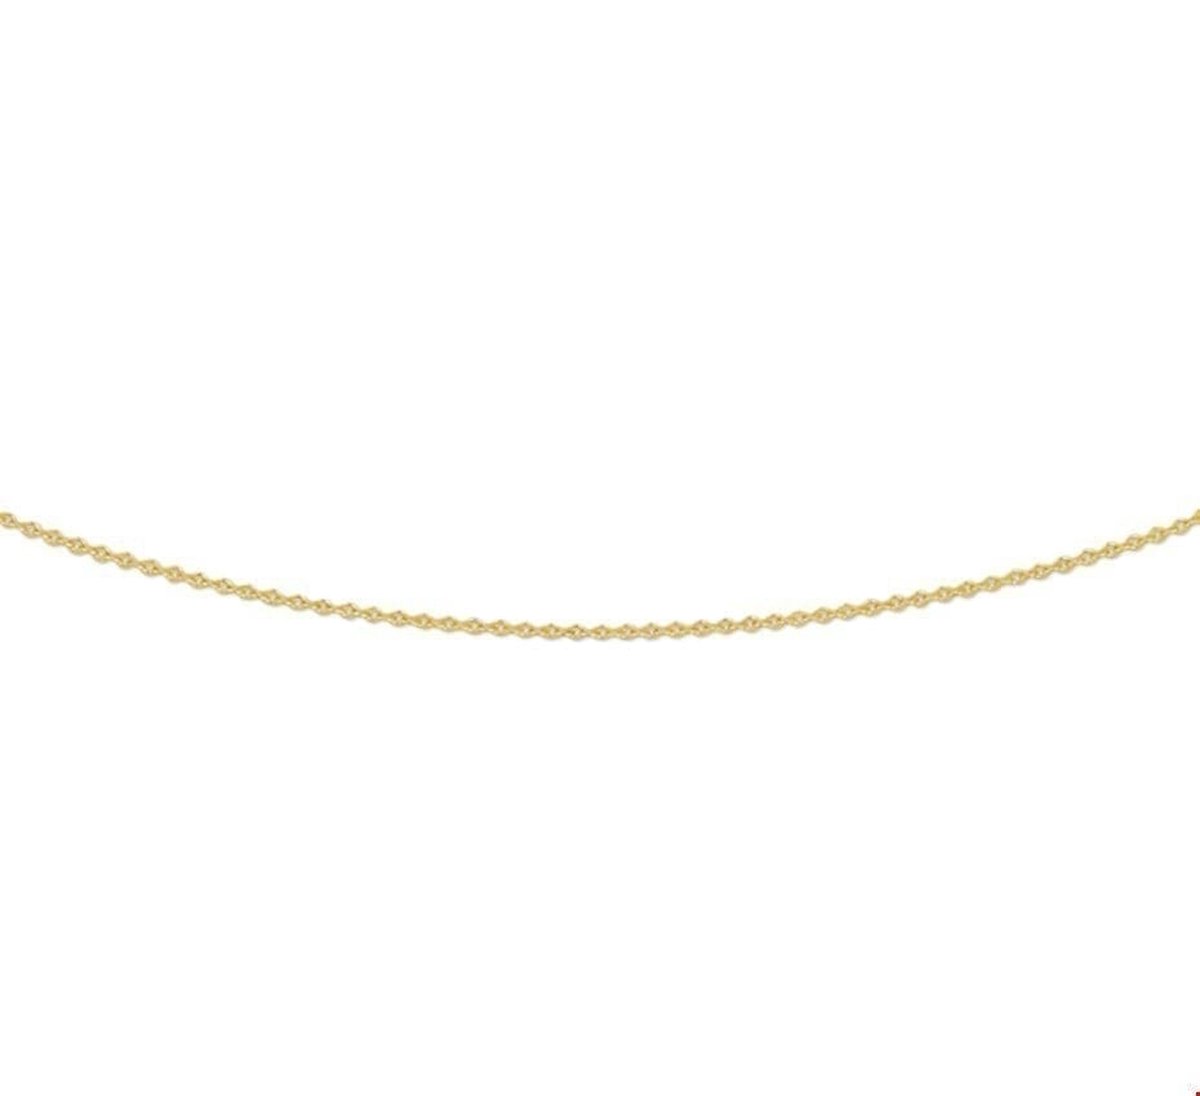 The Jewelry Collection Ketting Anker Plat 0,8 mm 38 cm - Goud - Huiscollectie